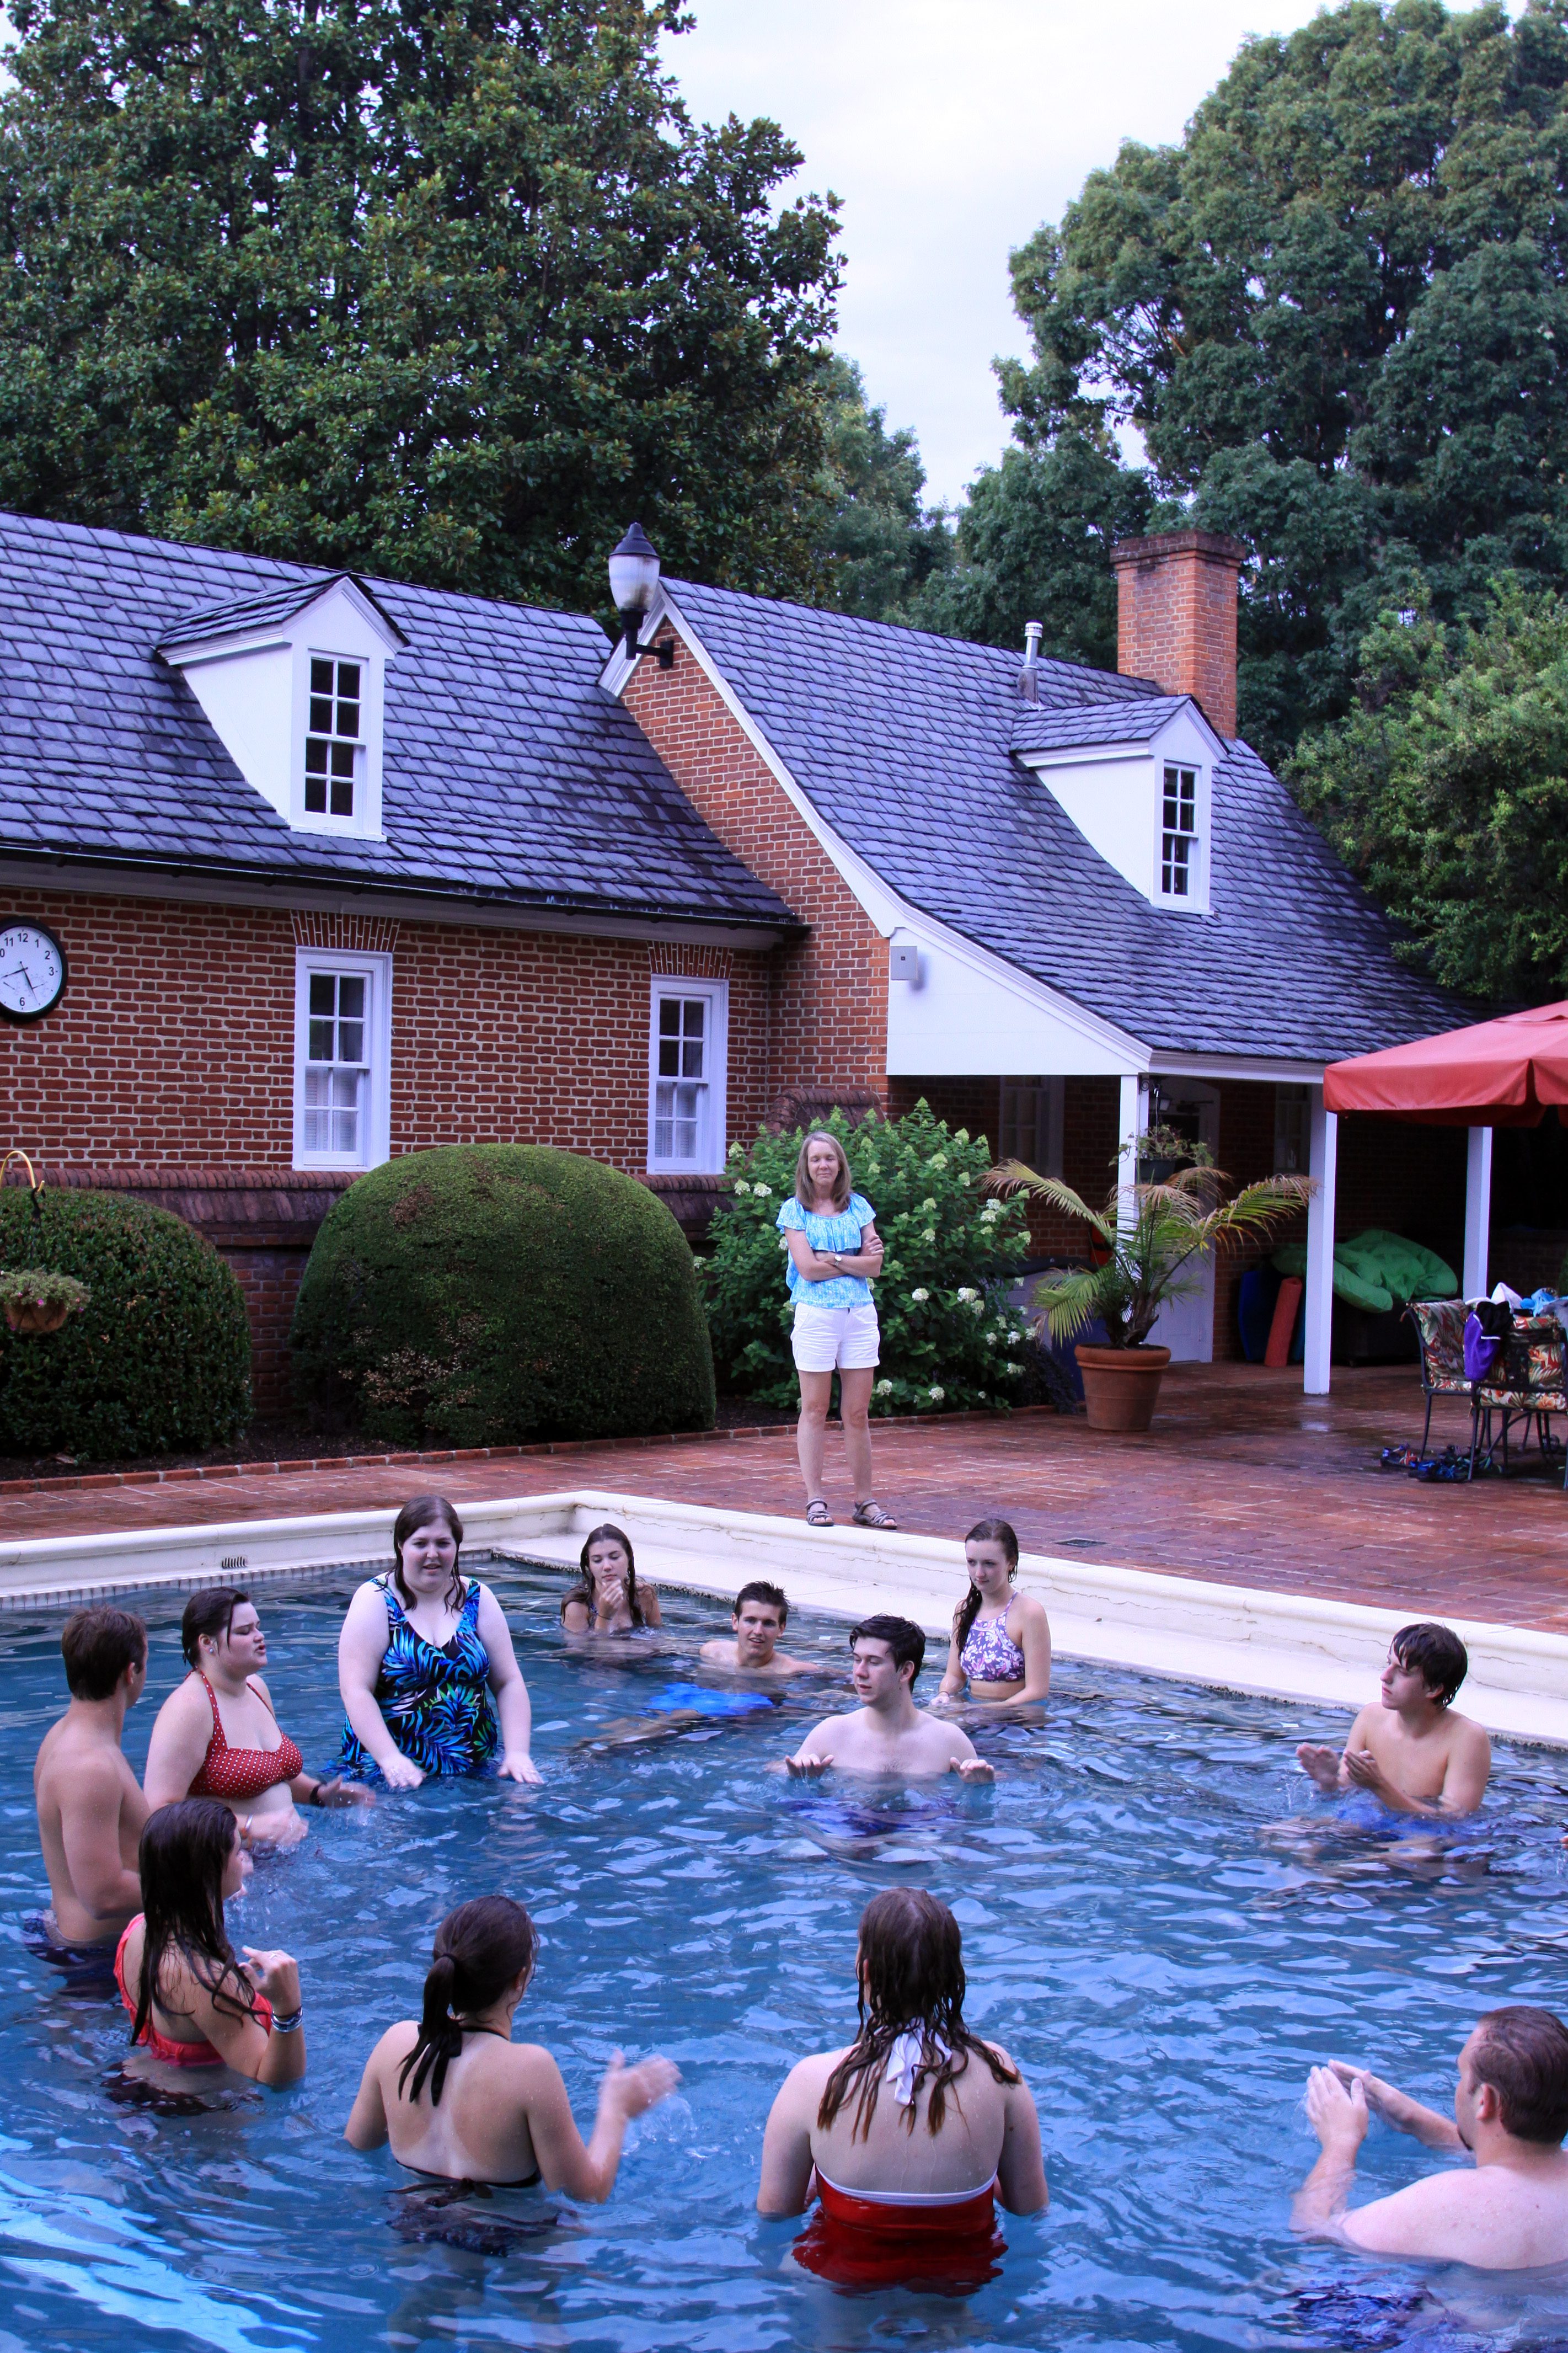 Pool party at President Davis' house!